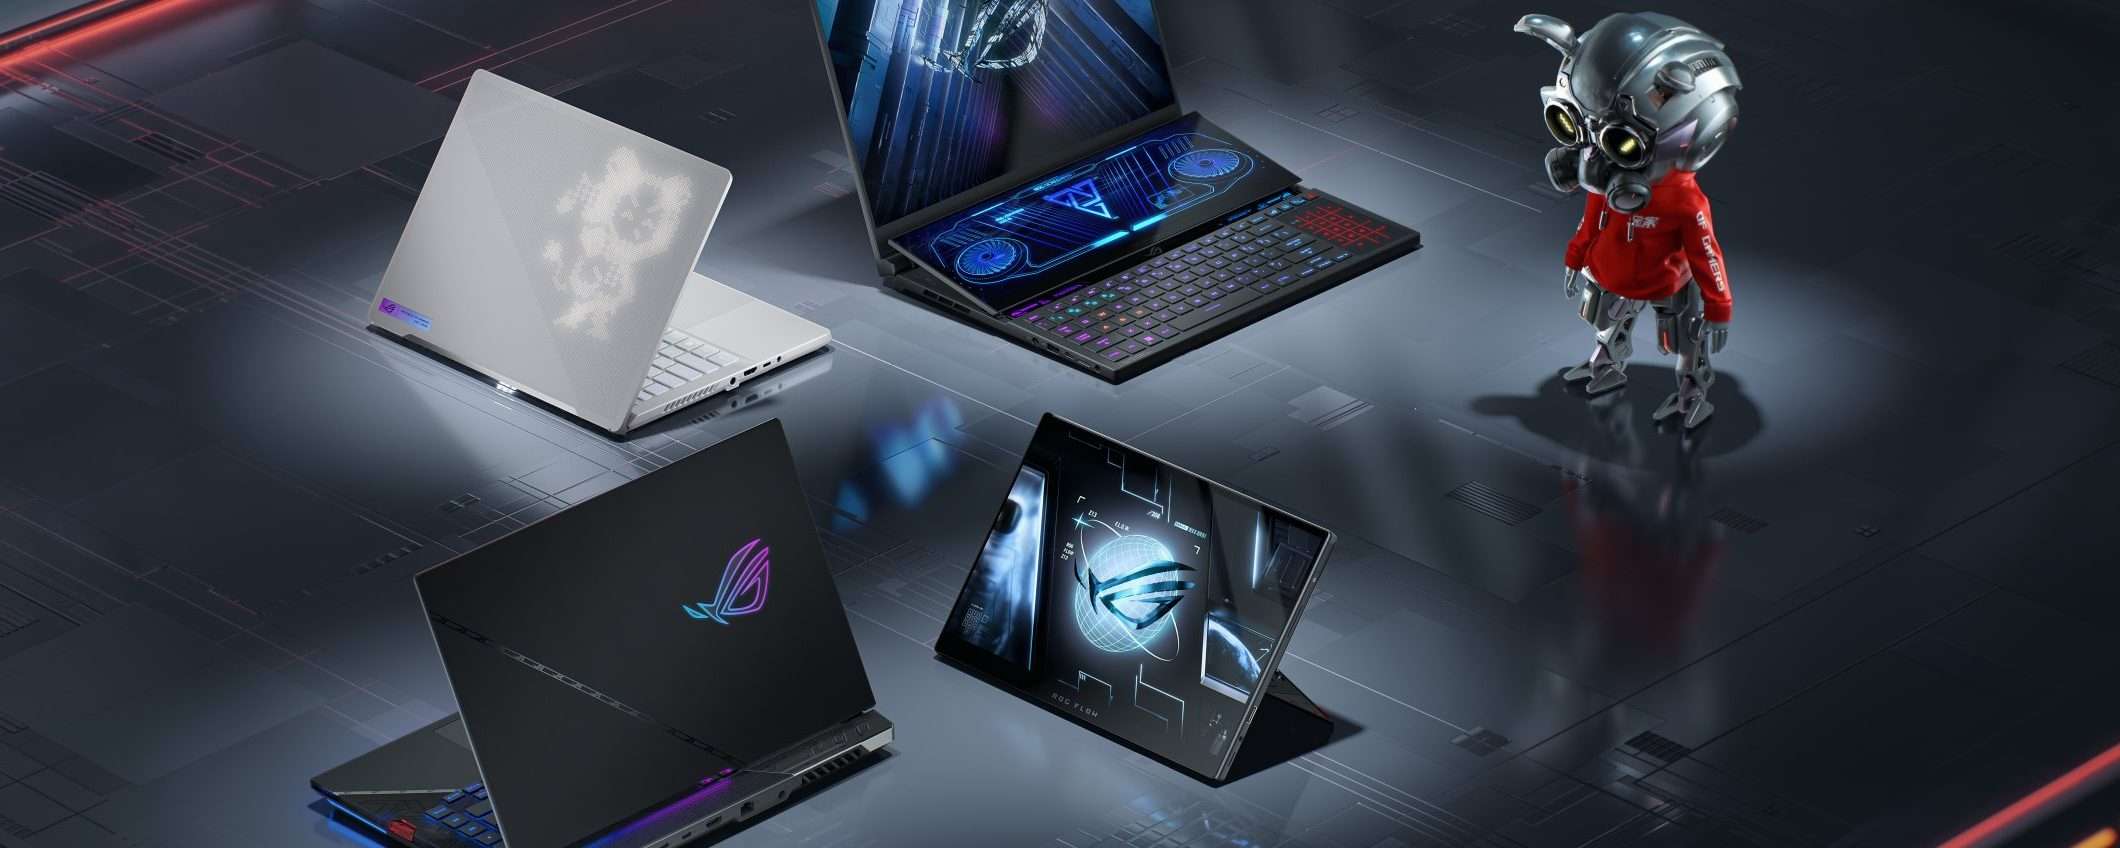 CES 2022: ASUS annuncia nuovi notebook ROG